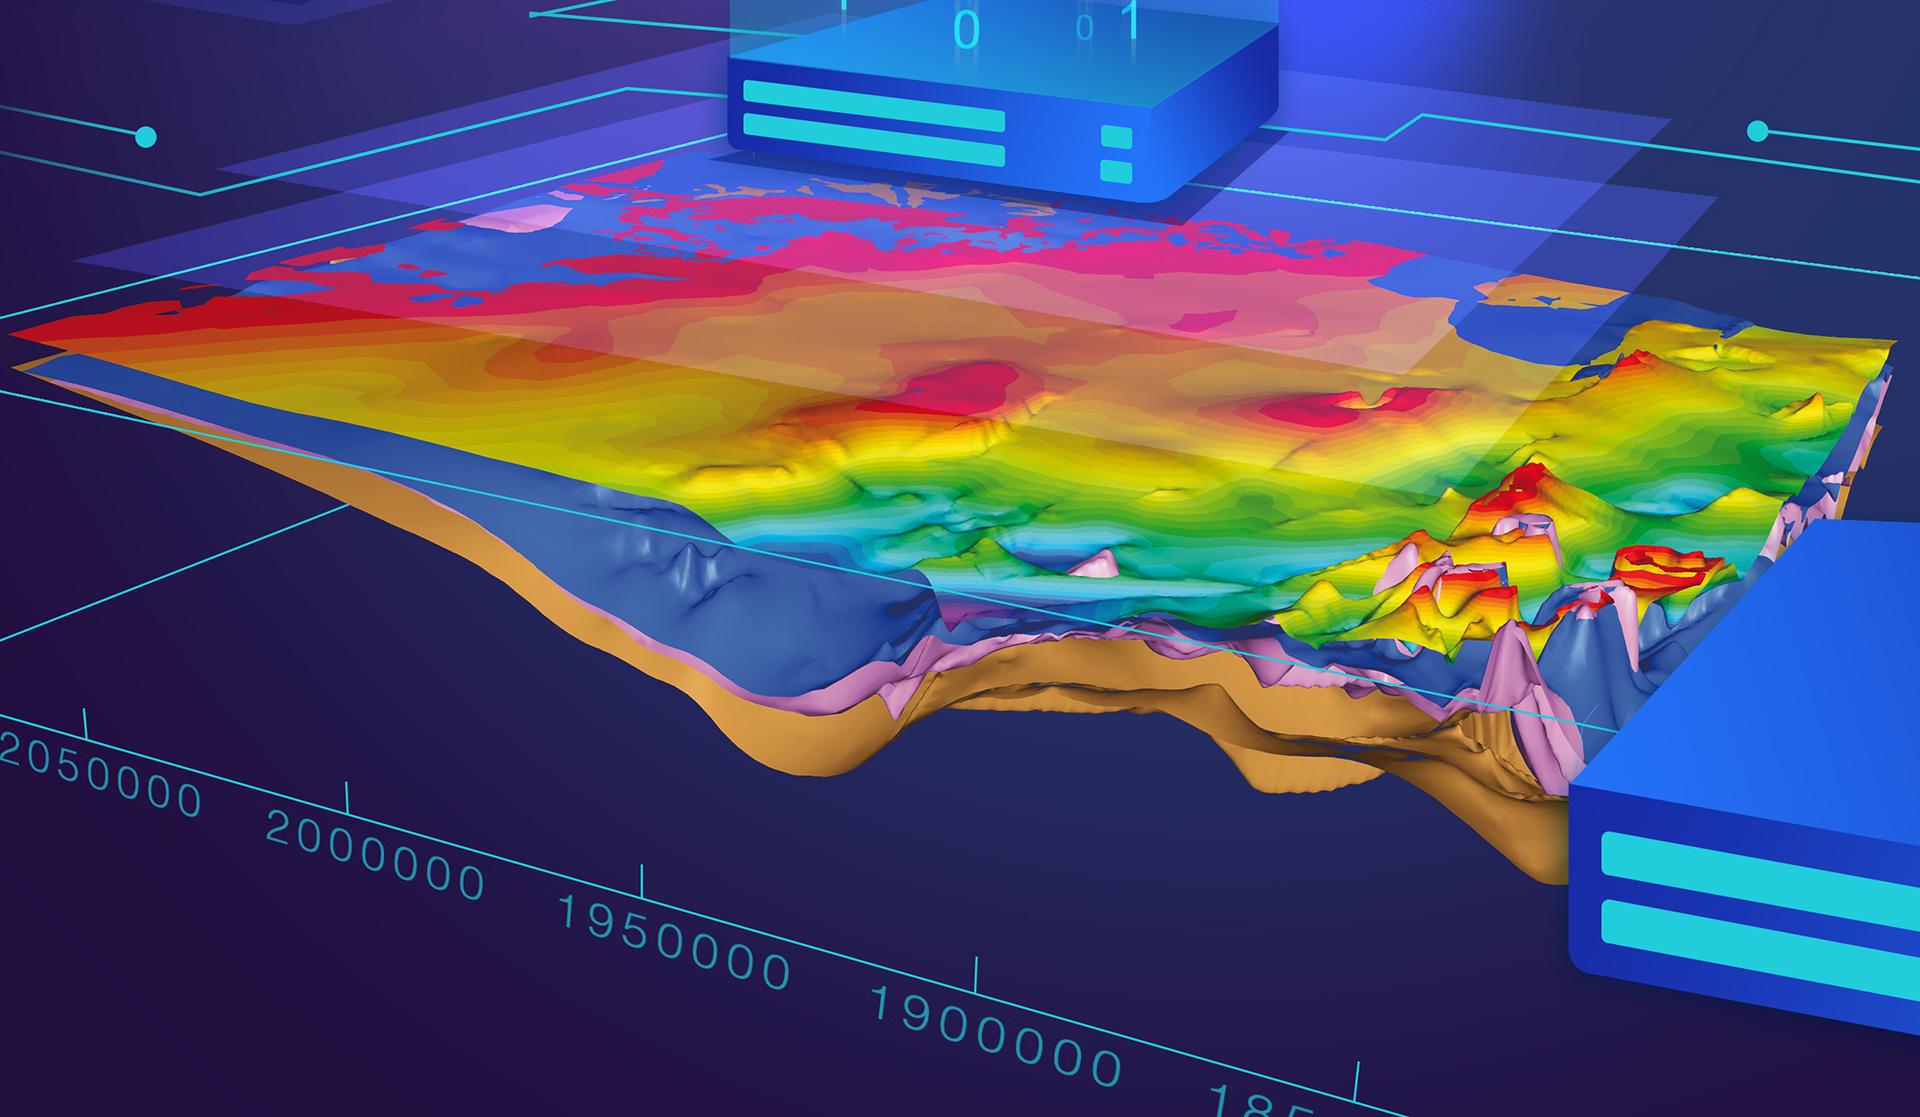 BRGM develops databases for analytical and predictive 3D-modelling of the status of the ground and subsurface